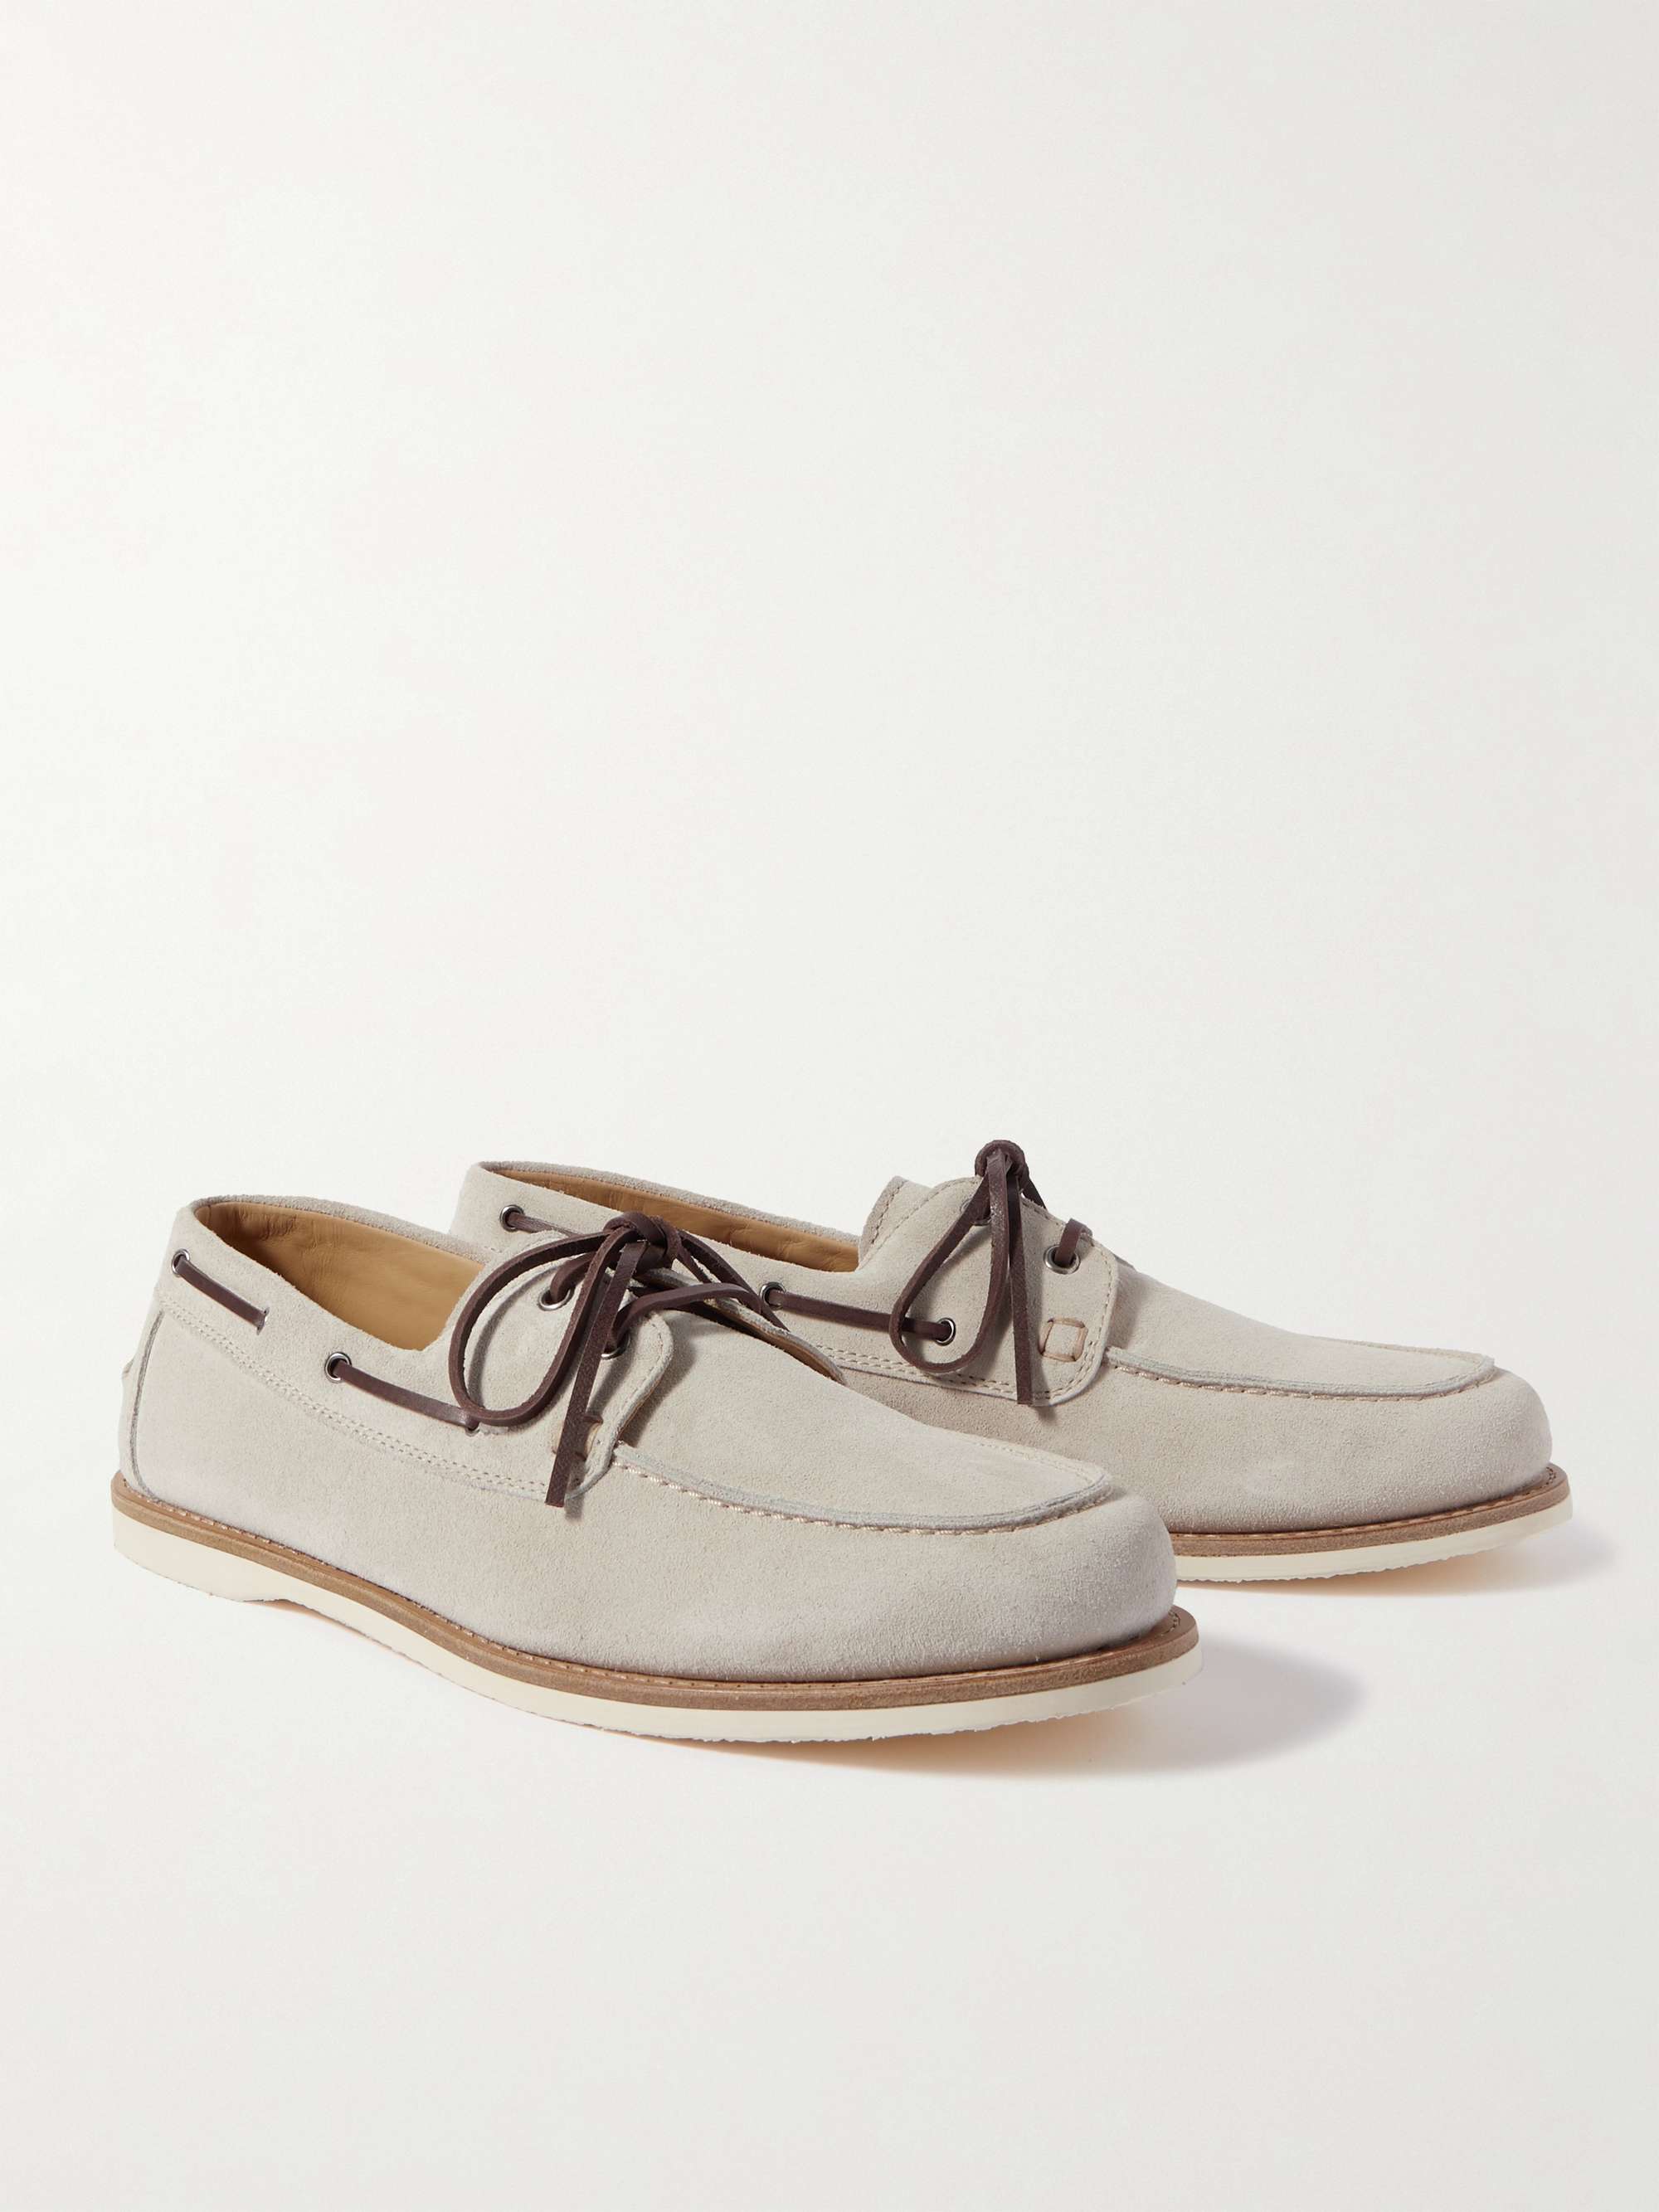 Off-white Leather-Trimmed Suede Boat Shoes | BRUNELLO CUCINELLI | MR PORTER